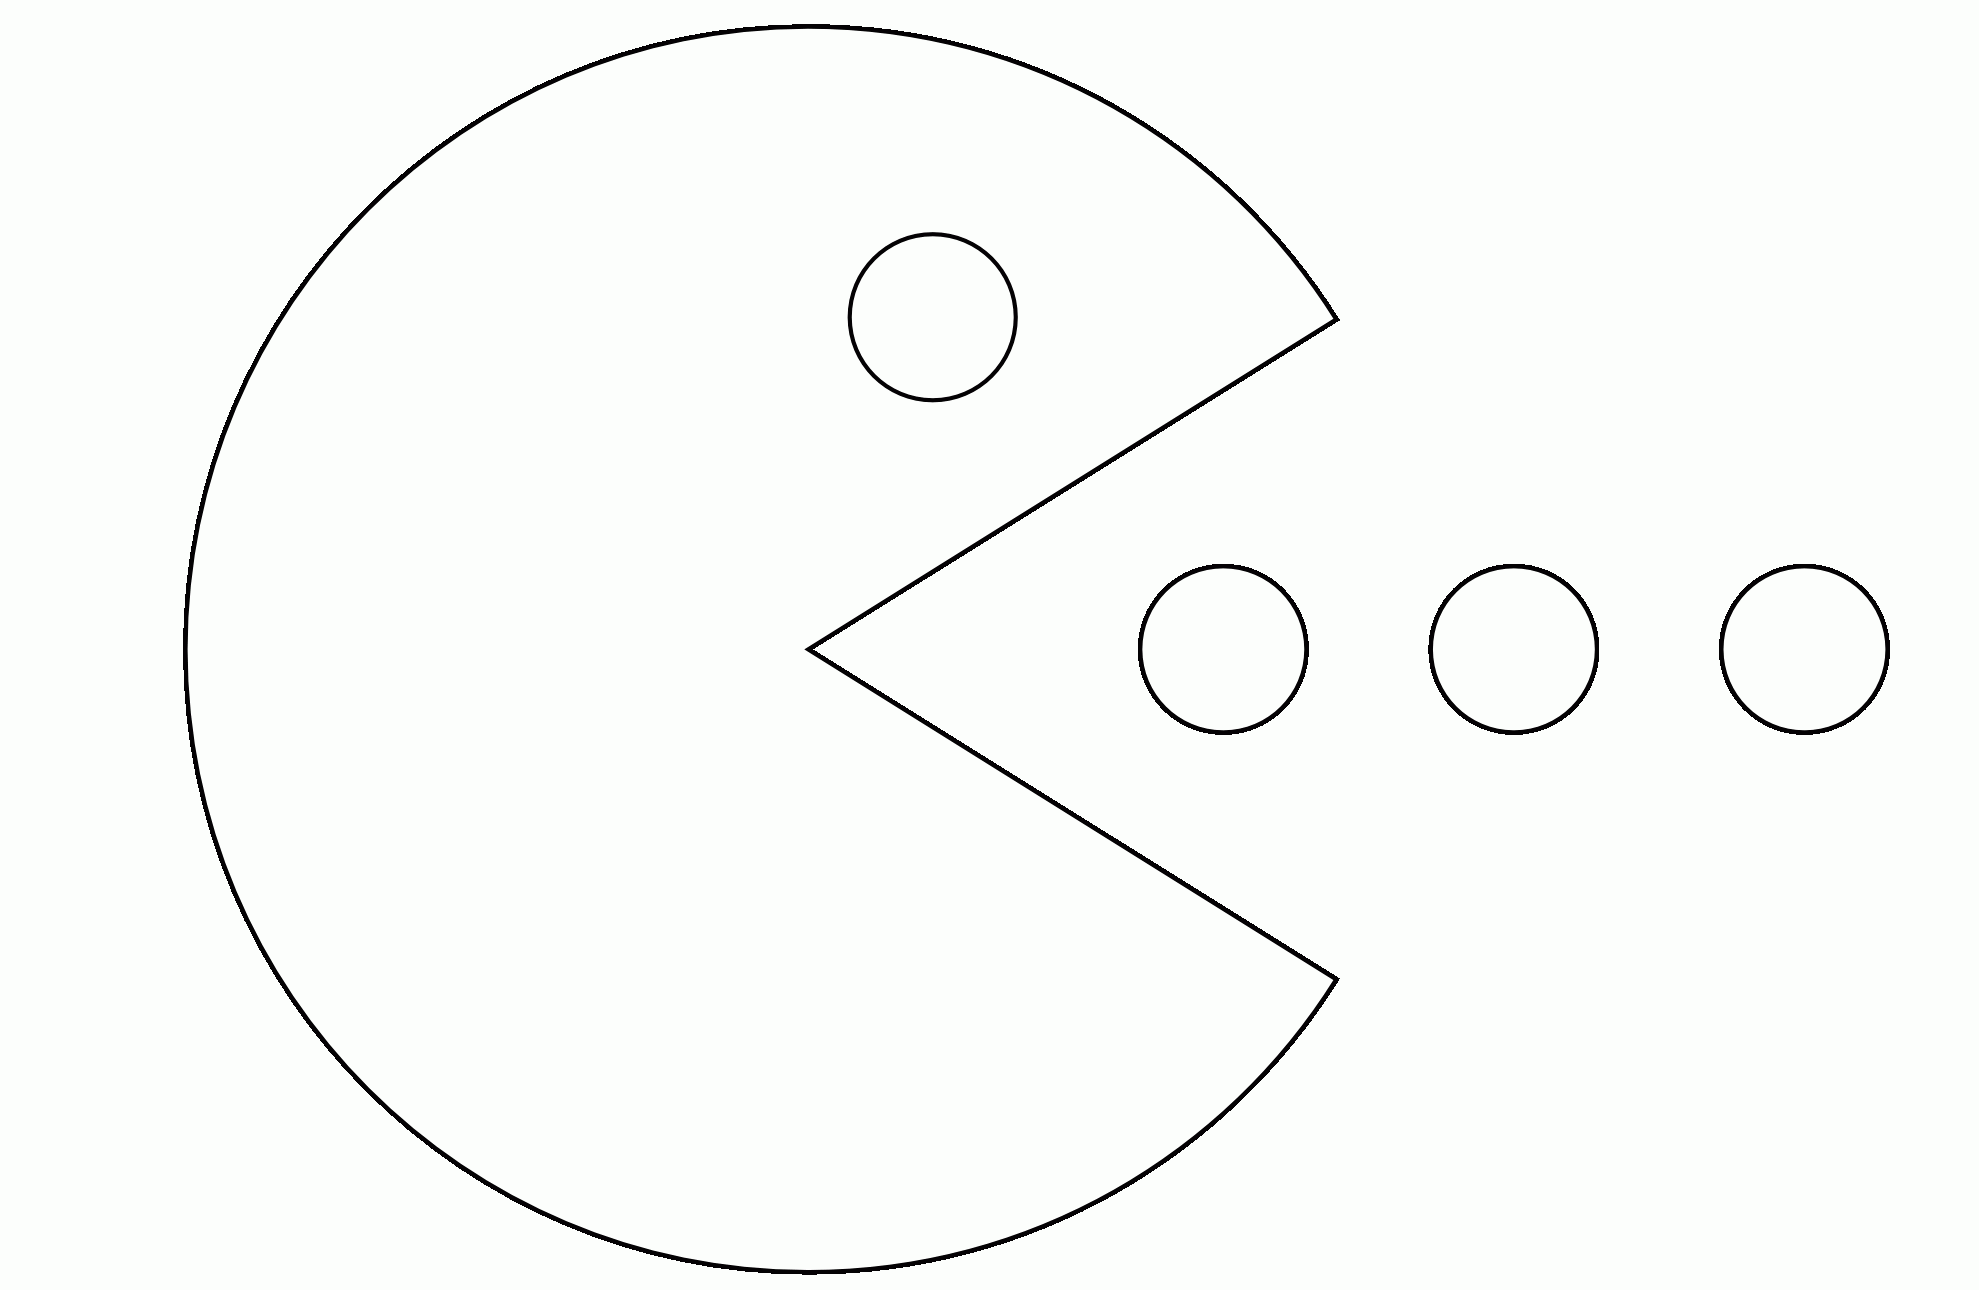 See Pacman Coloring Pages To Download And Print For Free - Widetheme